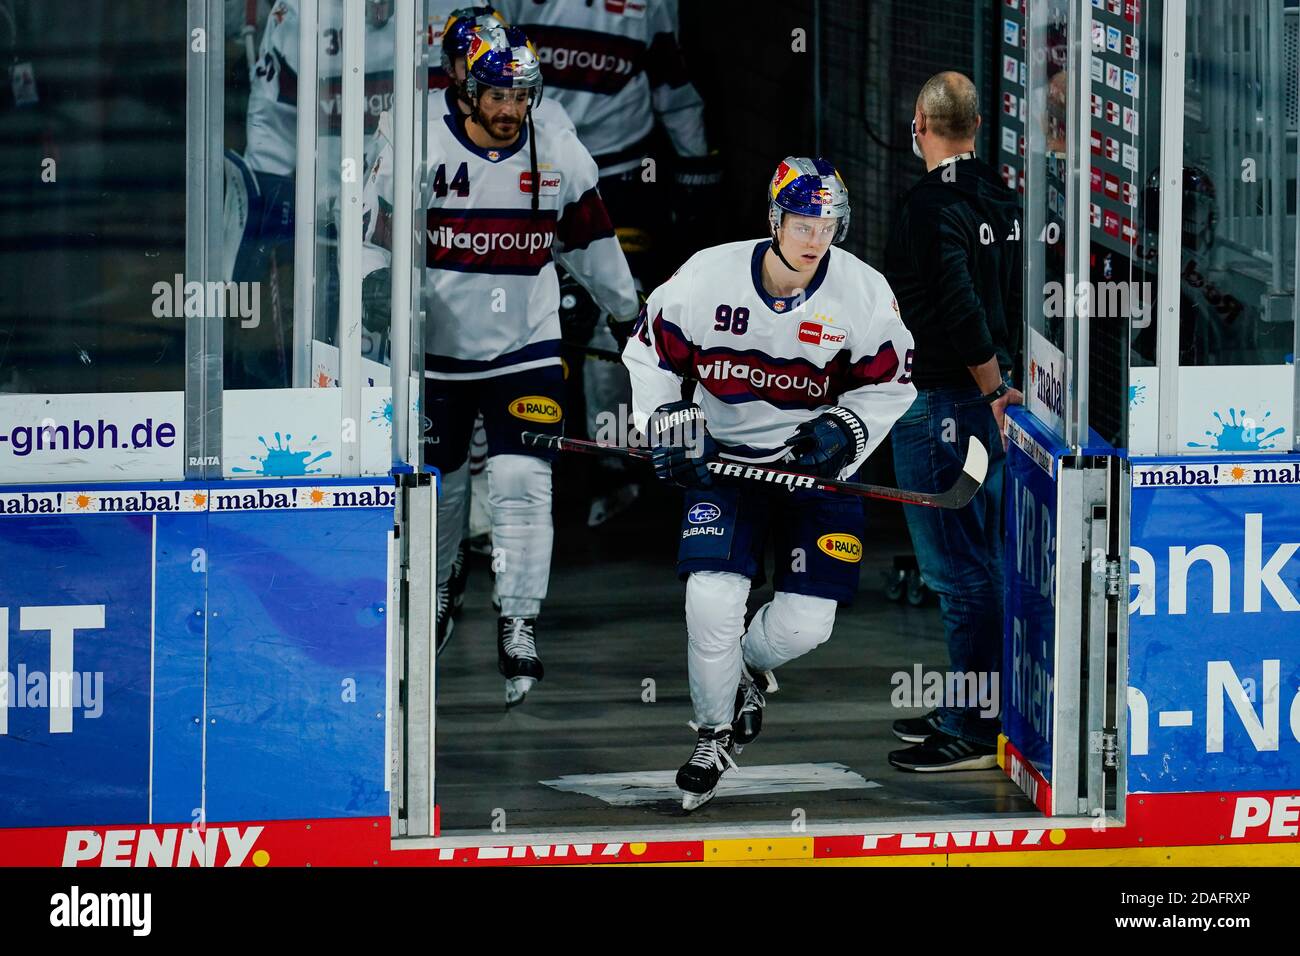 Mannheim, Germany. 12th Nov, 2020. Ice hockey: Magenta Sport Cup, Adler Mannheim - EHC Red Bull Munich, preliminary round, Group B, 1st day of play, SAP Arena. Munich's Bastian Eckl (in front) enters the ice rink with teammates. Credit: Uwe Anspach/dpa/Alamy Live News Stock Photo